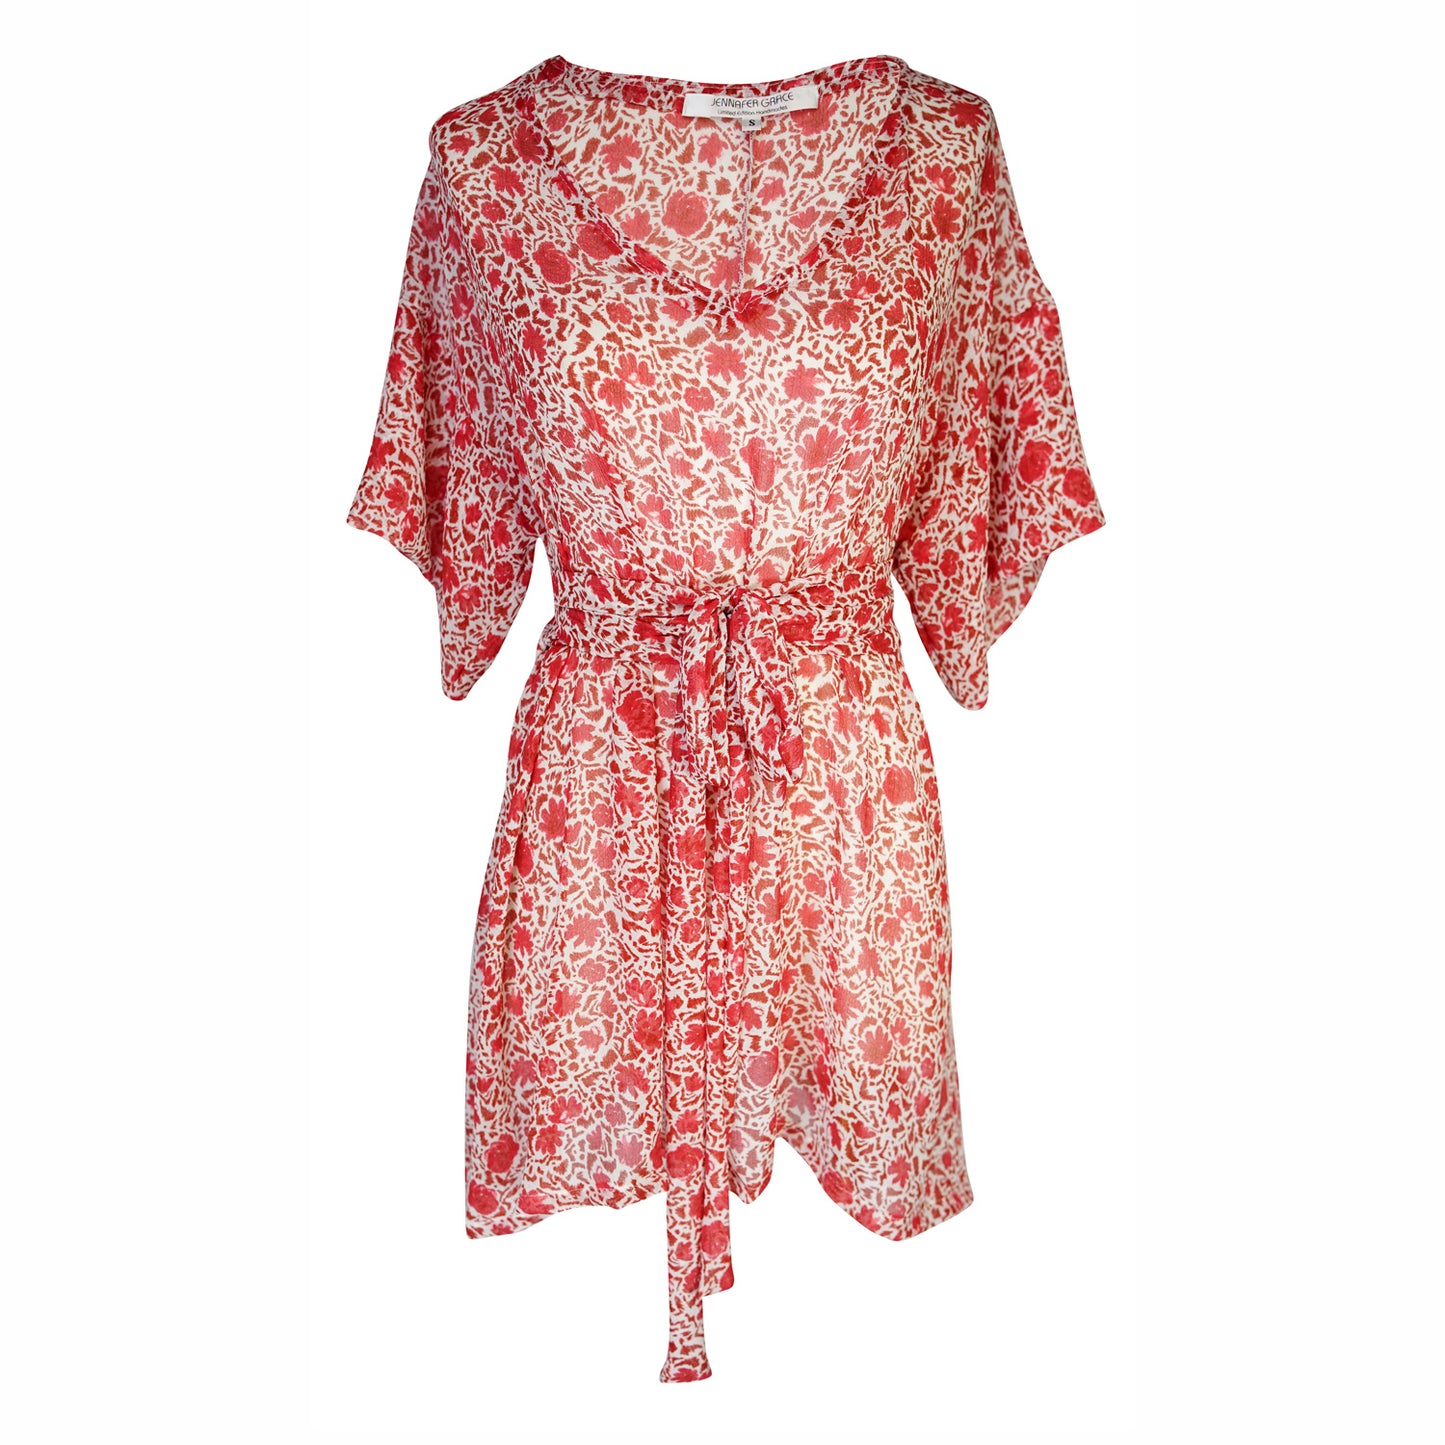 This top is a wrap blouse with a red and ivory floral pattern. It has a v-neckline and short, fluttery sleeves that add a soft, feminine touch. The blouse ties at the waist with a fabric belt, which helps to accentuate the waistline. It is made from a lightweight material that suggests comfort and ease of wear.